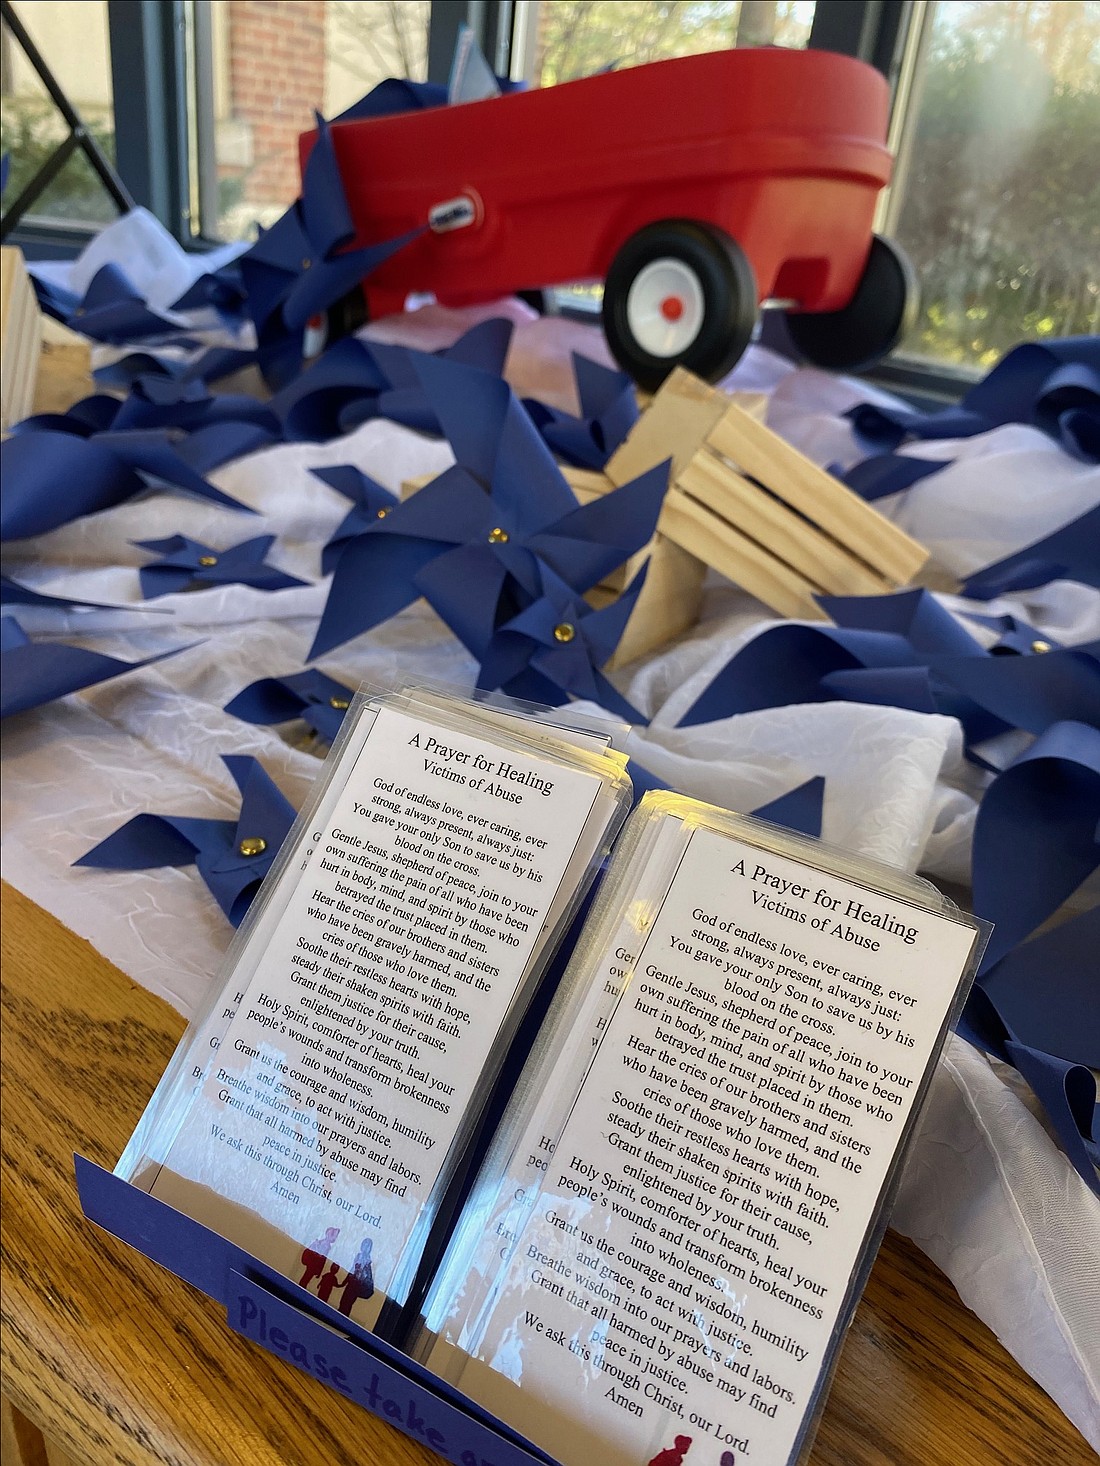 The Diocese of Albany recognized National Child Abuse Prevention Month - designated annually in April - with a window display and pinwheels in the front yard of the Pastoral Center. (Kathy Barrans photo)